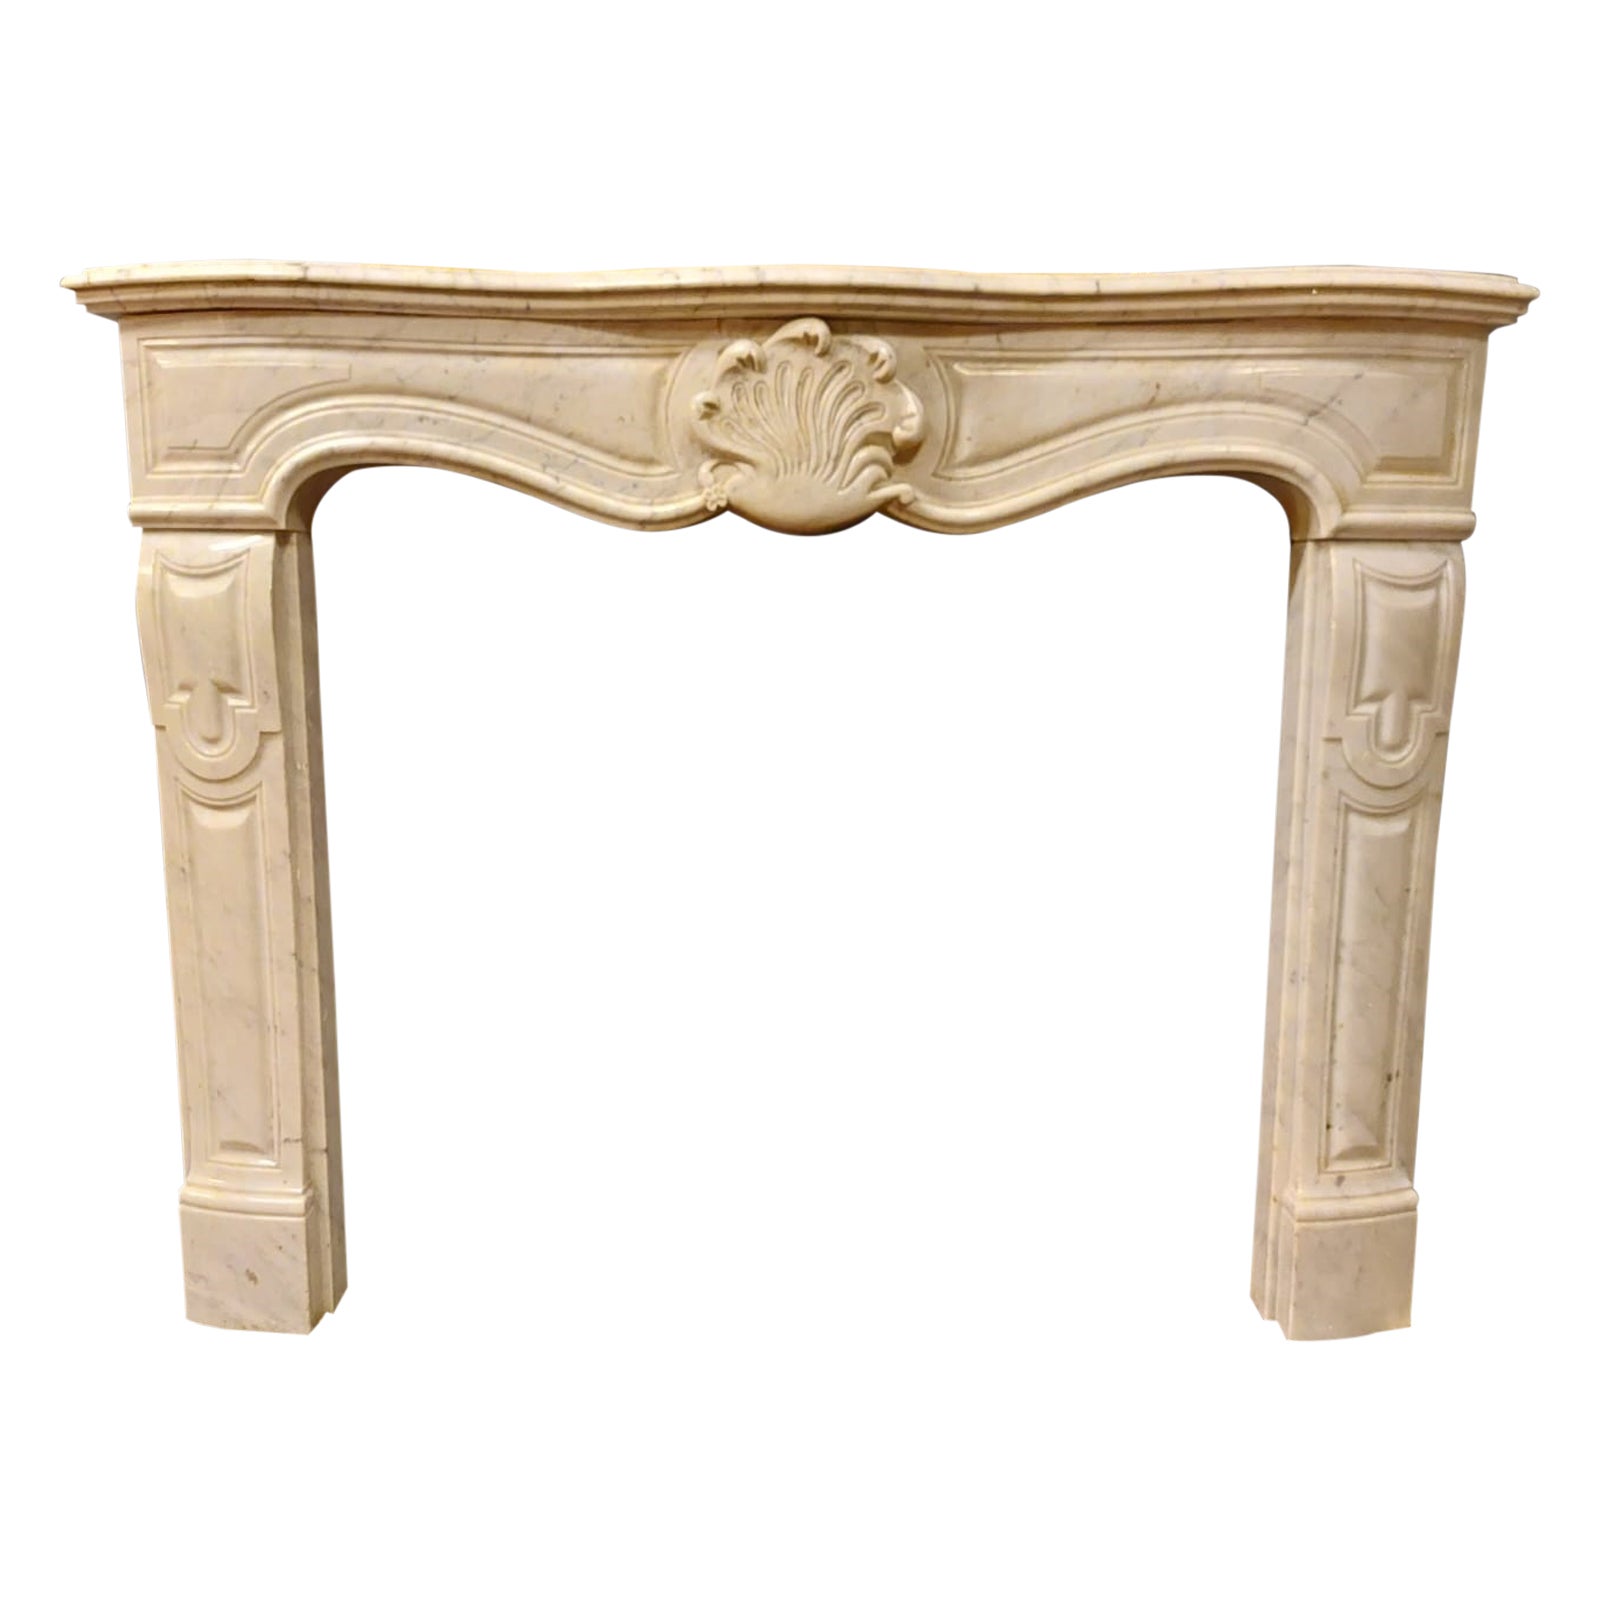 Antique fireplace in white Carrara marble, carved central shell, '700 France